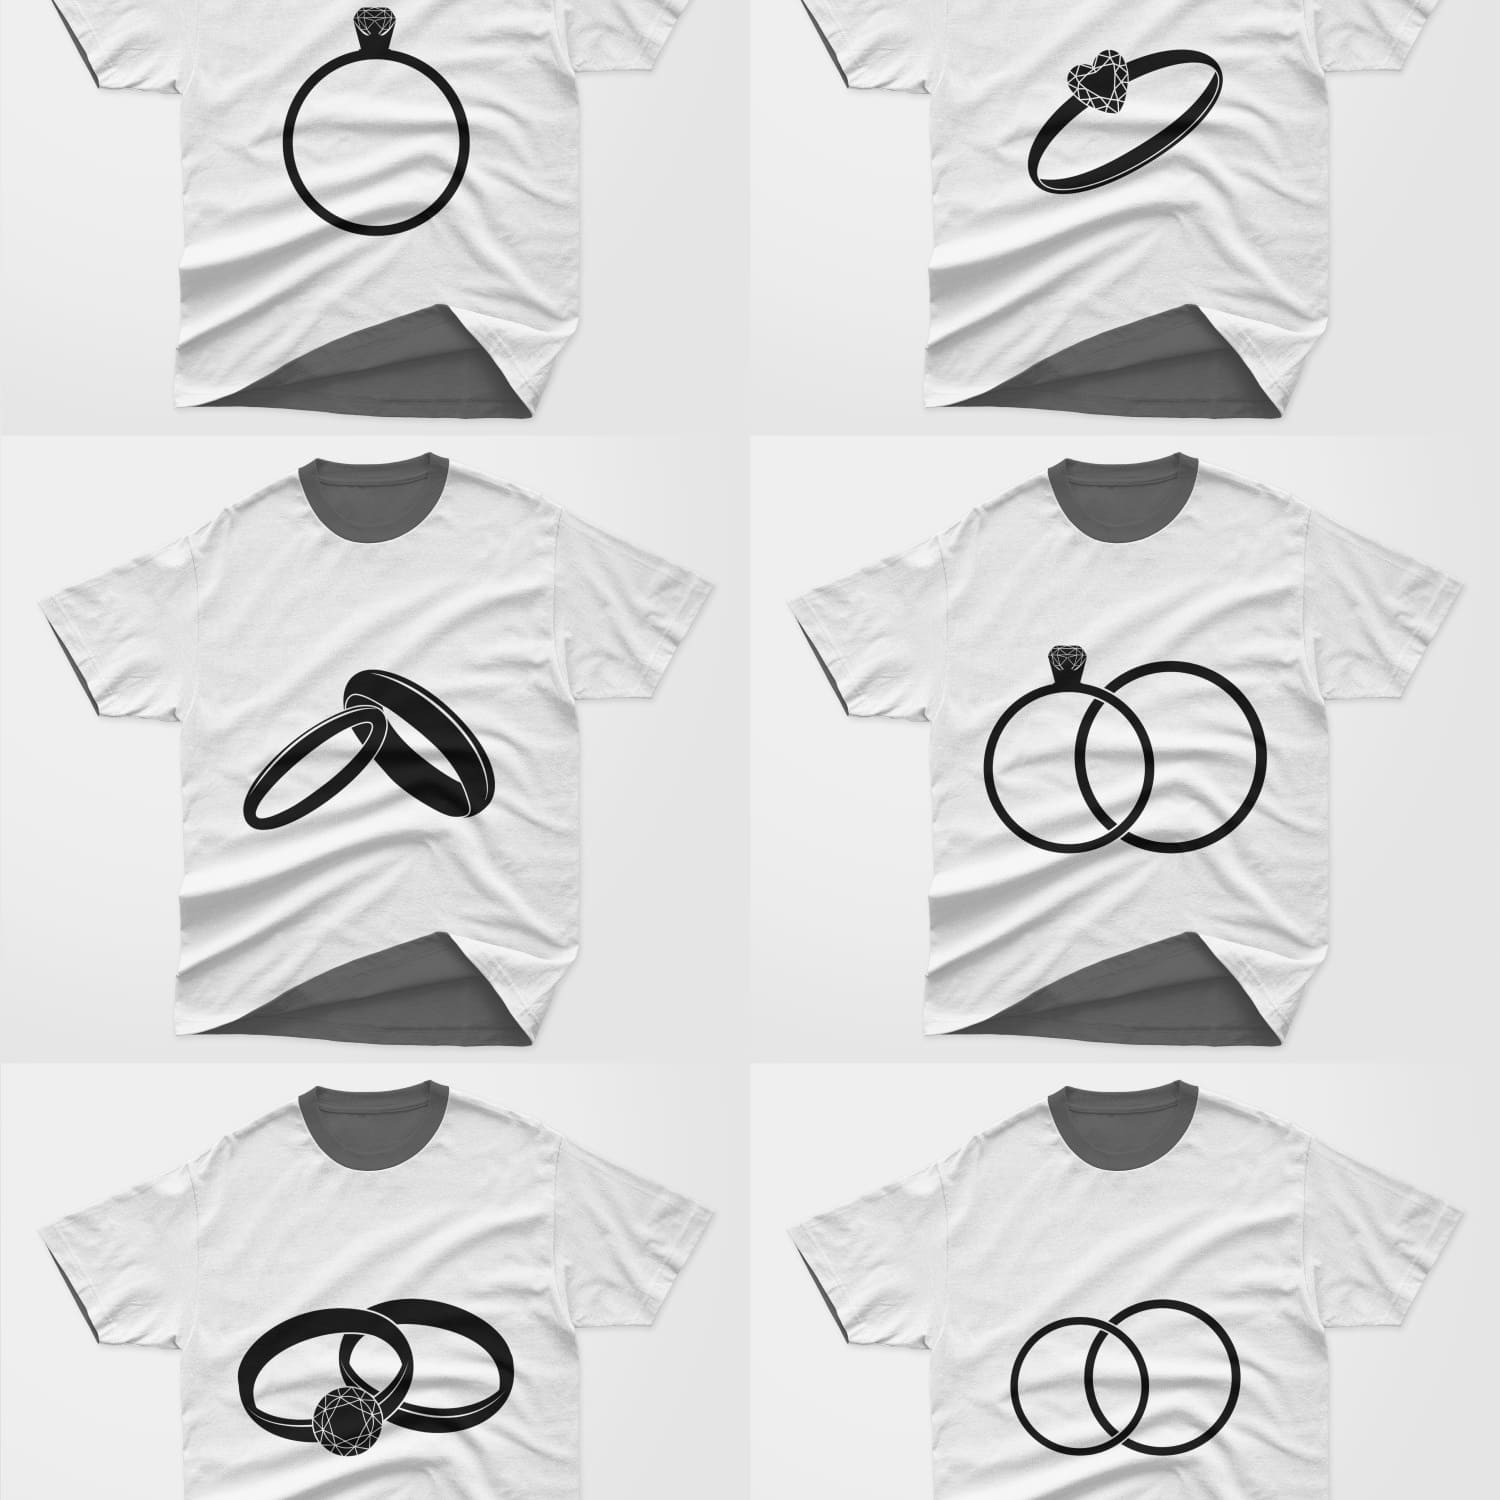 Six variants of t-shirts with a wedding design.